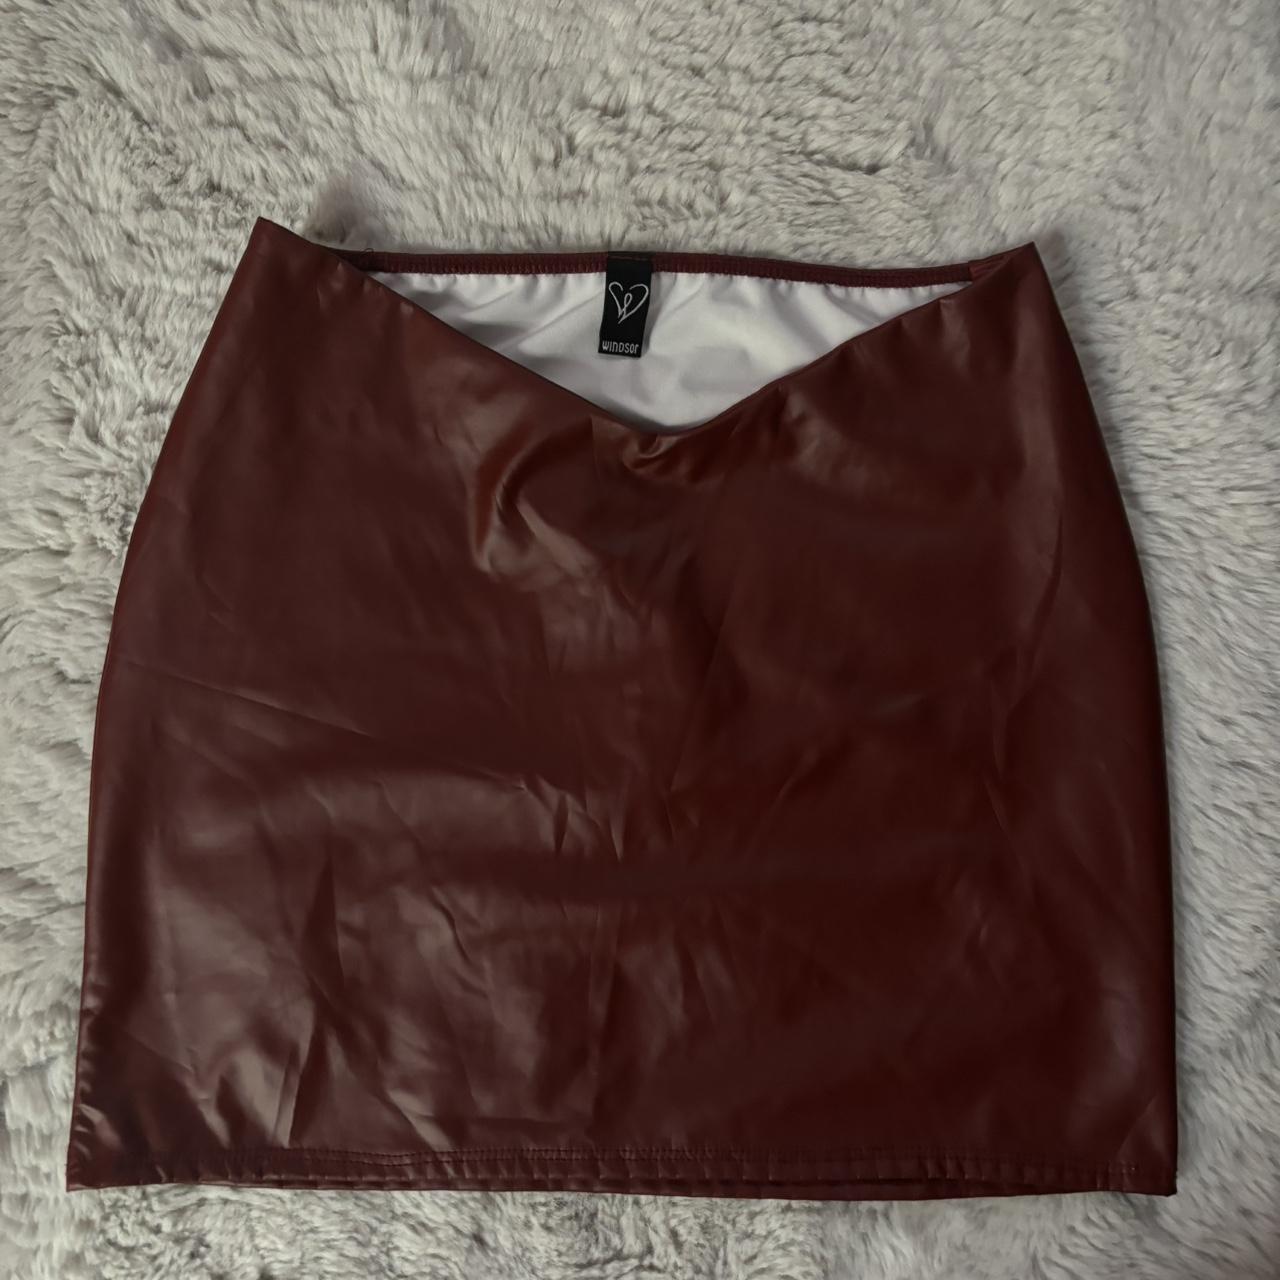 windsor low rise red leather mini skirt size s... - Depop